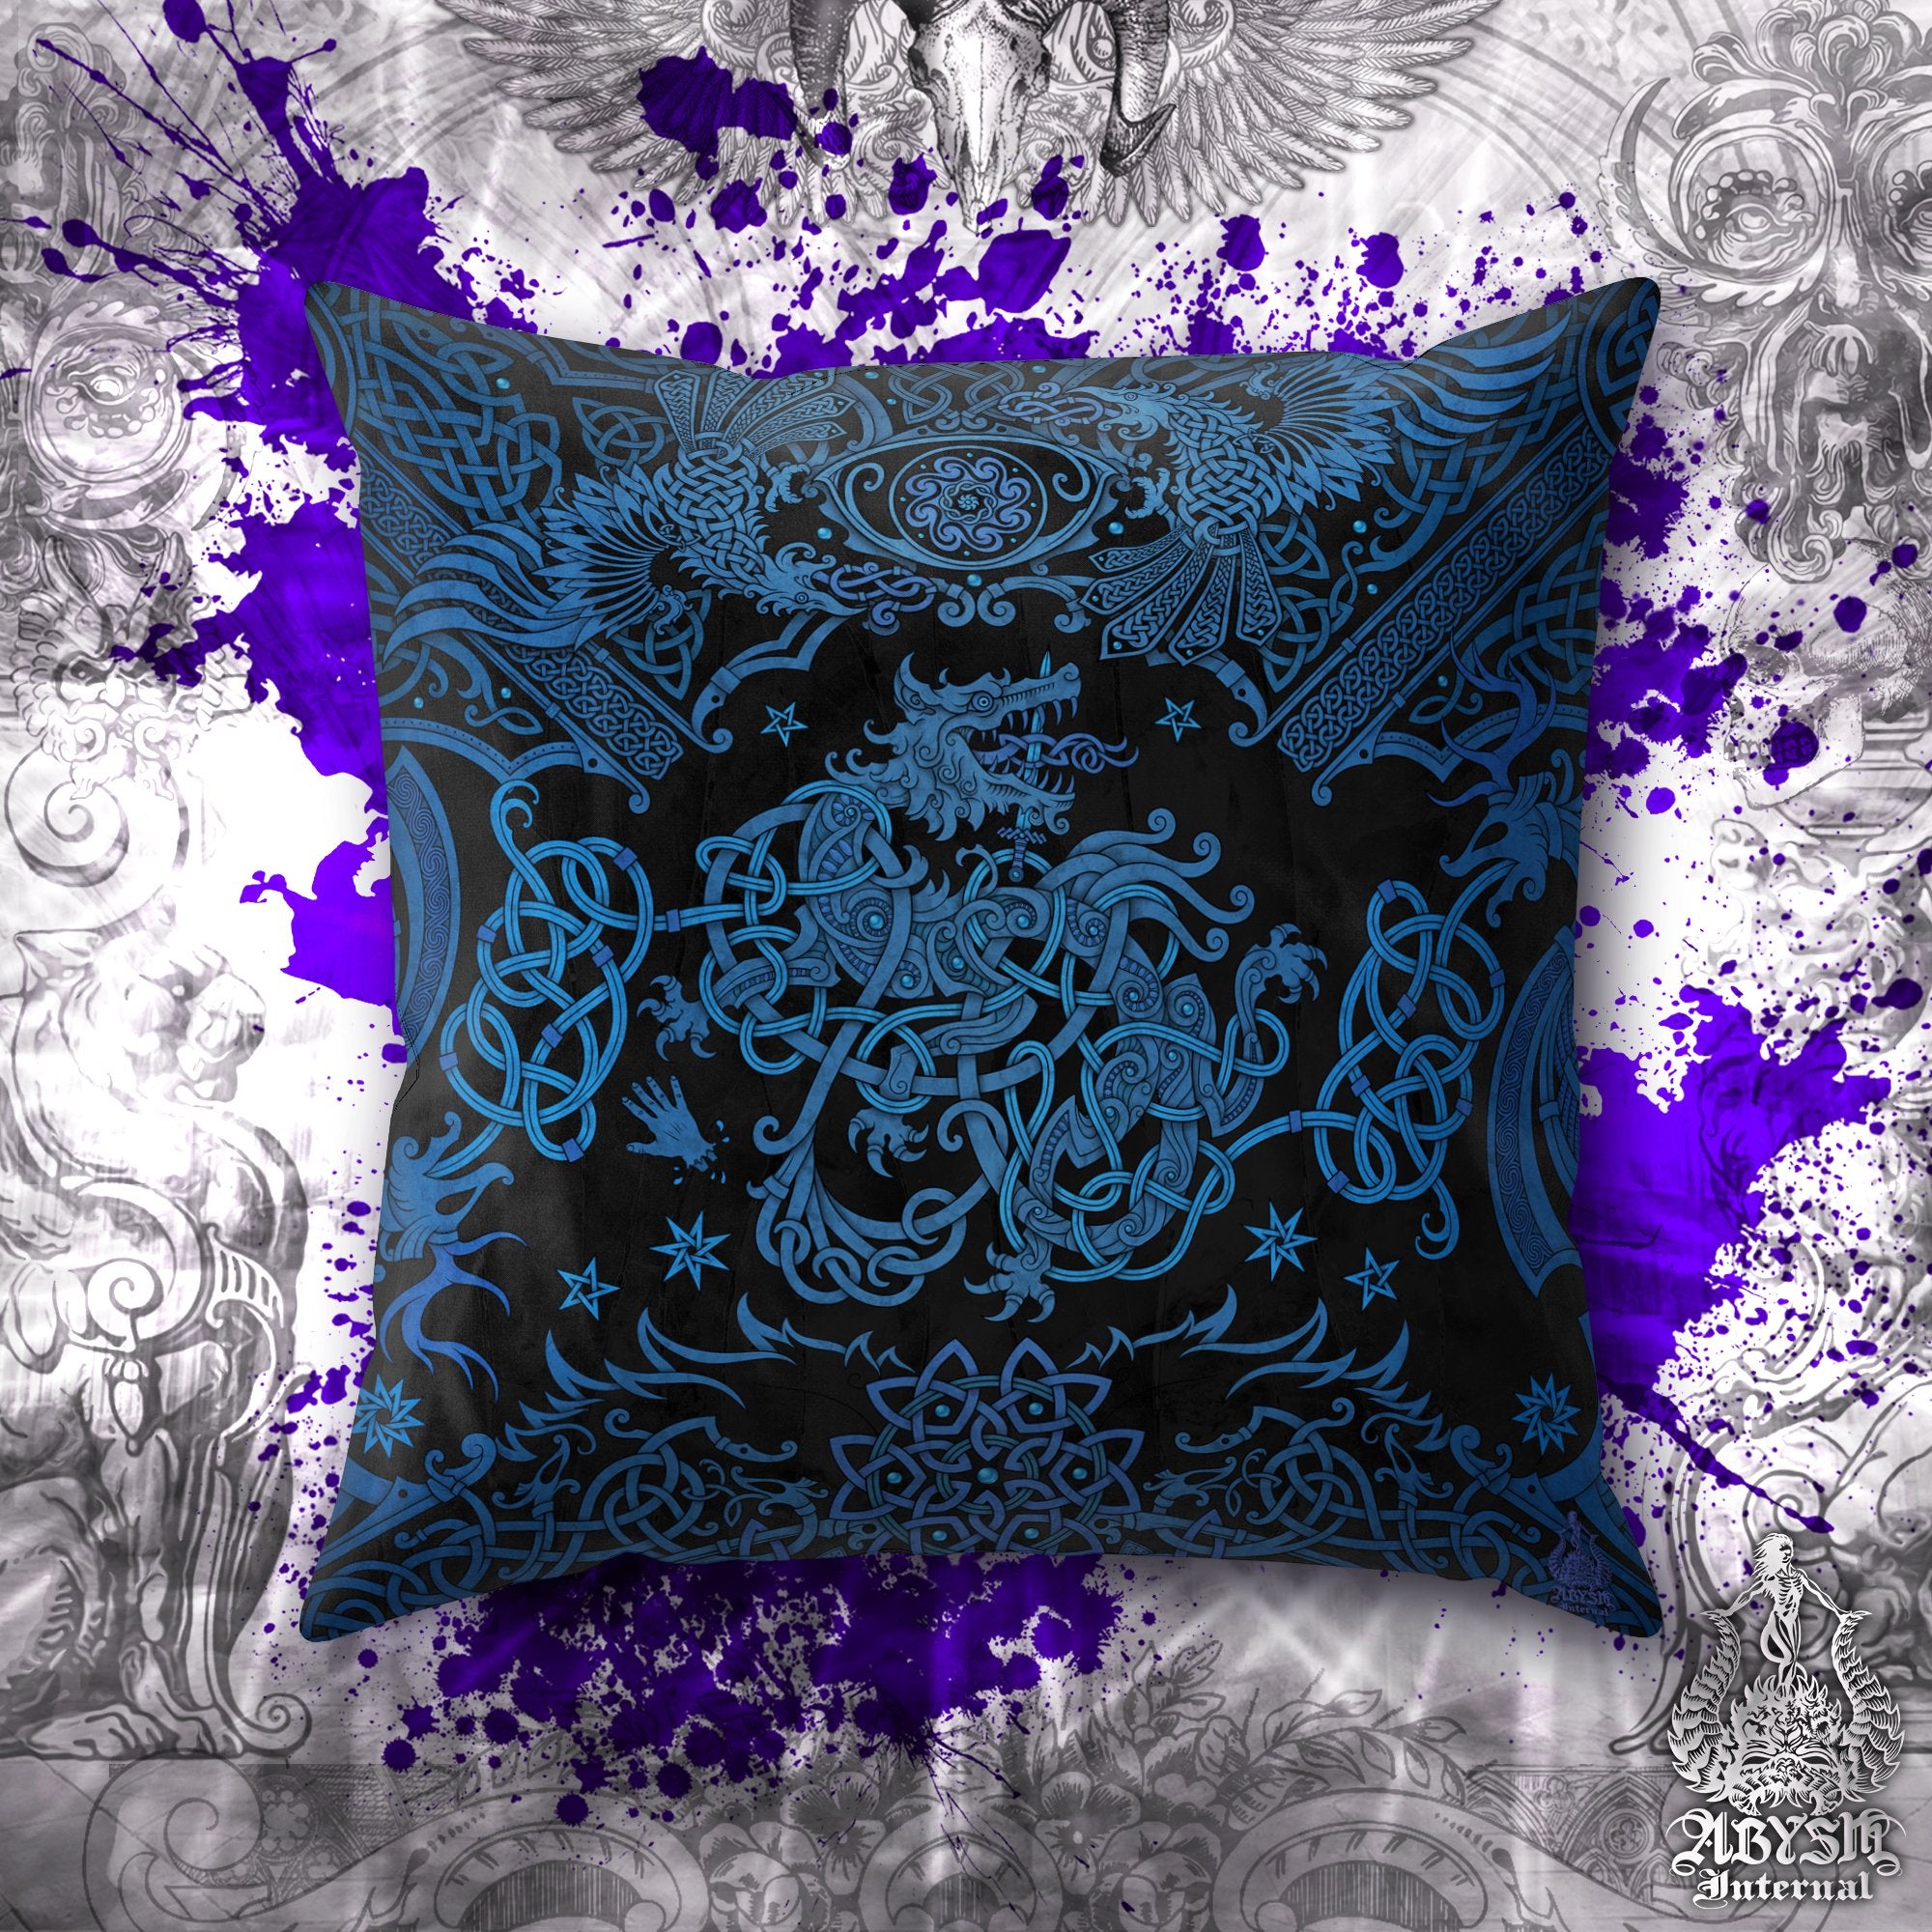 Fenrir Throw Pillow, Decorative Accent Pillow, Square Cushion Cover, Viking Wolf Room Decor, Norse Knotwork, Nordic Art, Alternative Home - Black and Blue - Abysm Internal